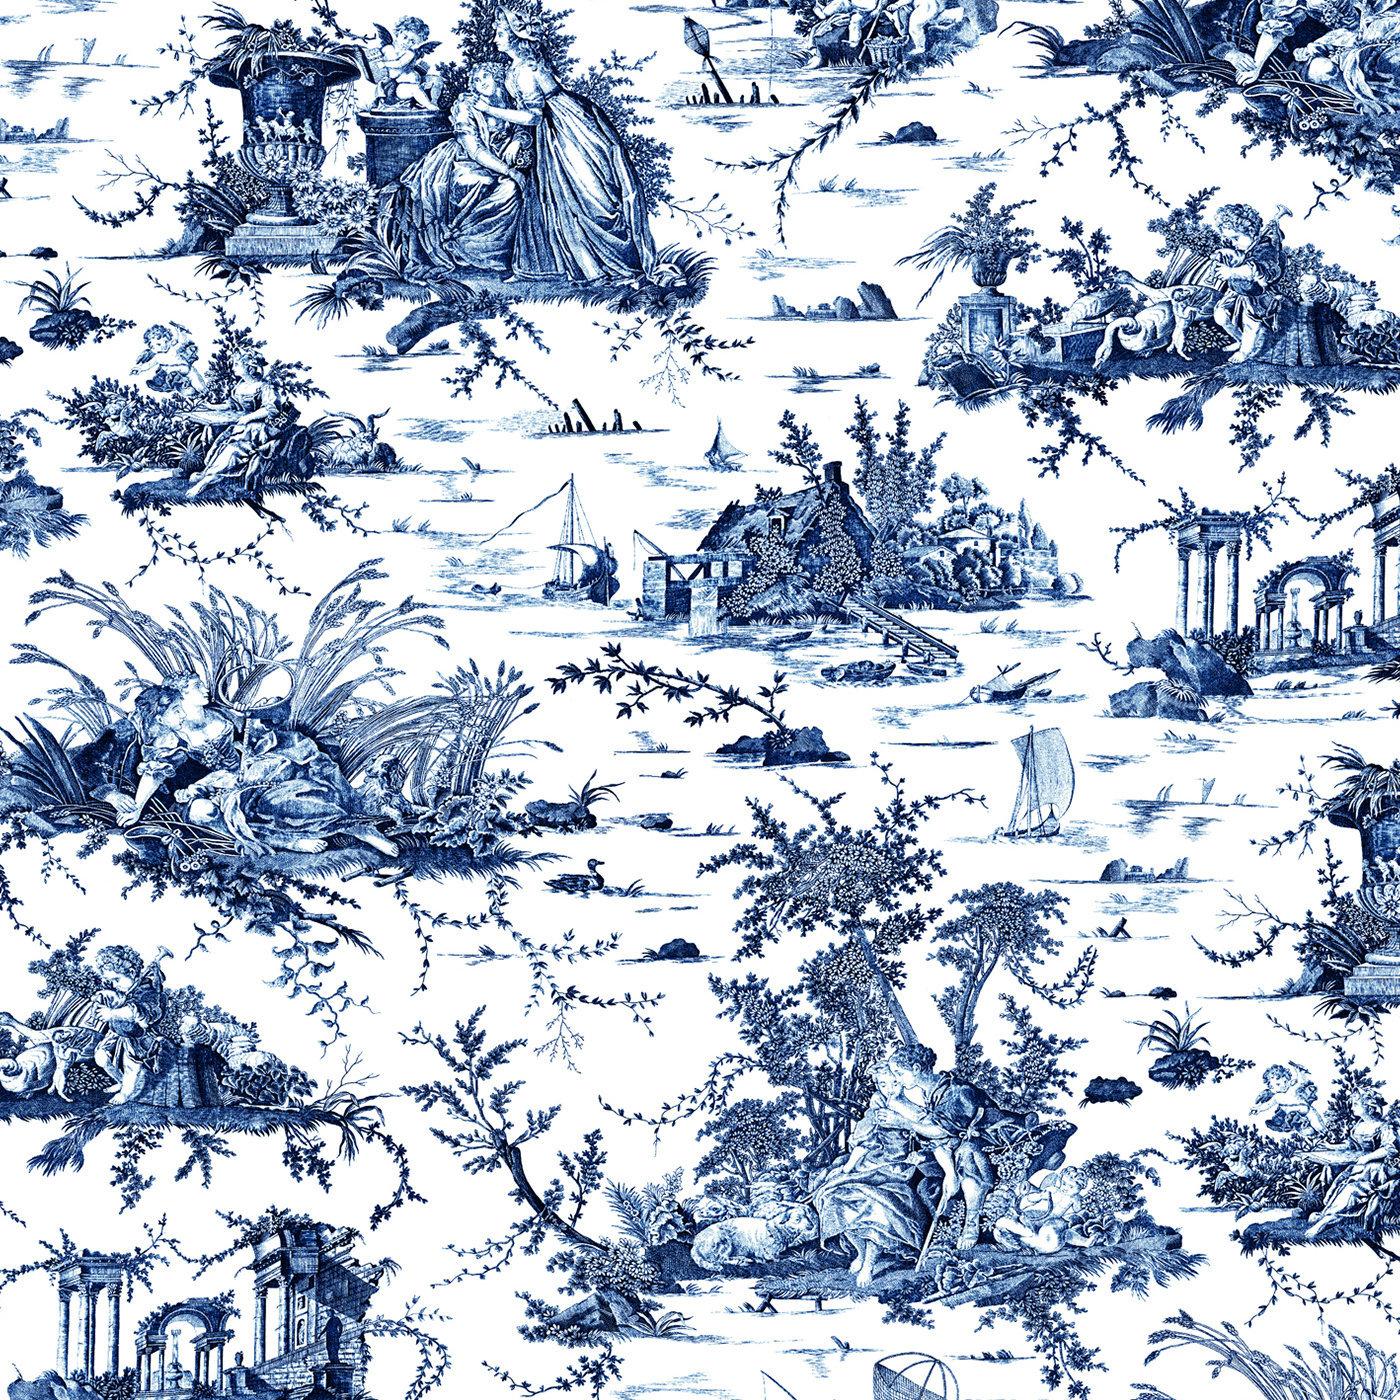 This classy pouf will be a superb addition to classic bedrooms or living rooms, its distinctive Toile de Jouy by Toile Society upholstery adorned with rural scenarios in blue and white, conferring a sense of peace and genuineness. Its cylindrical